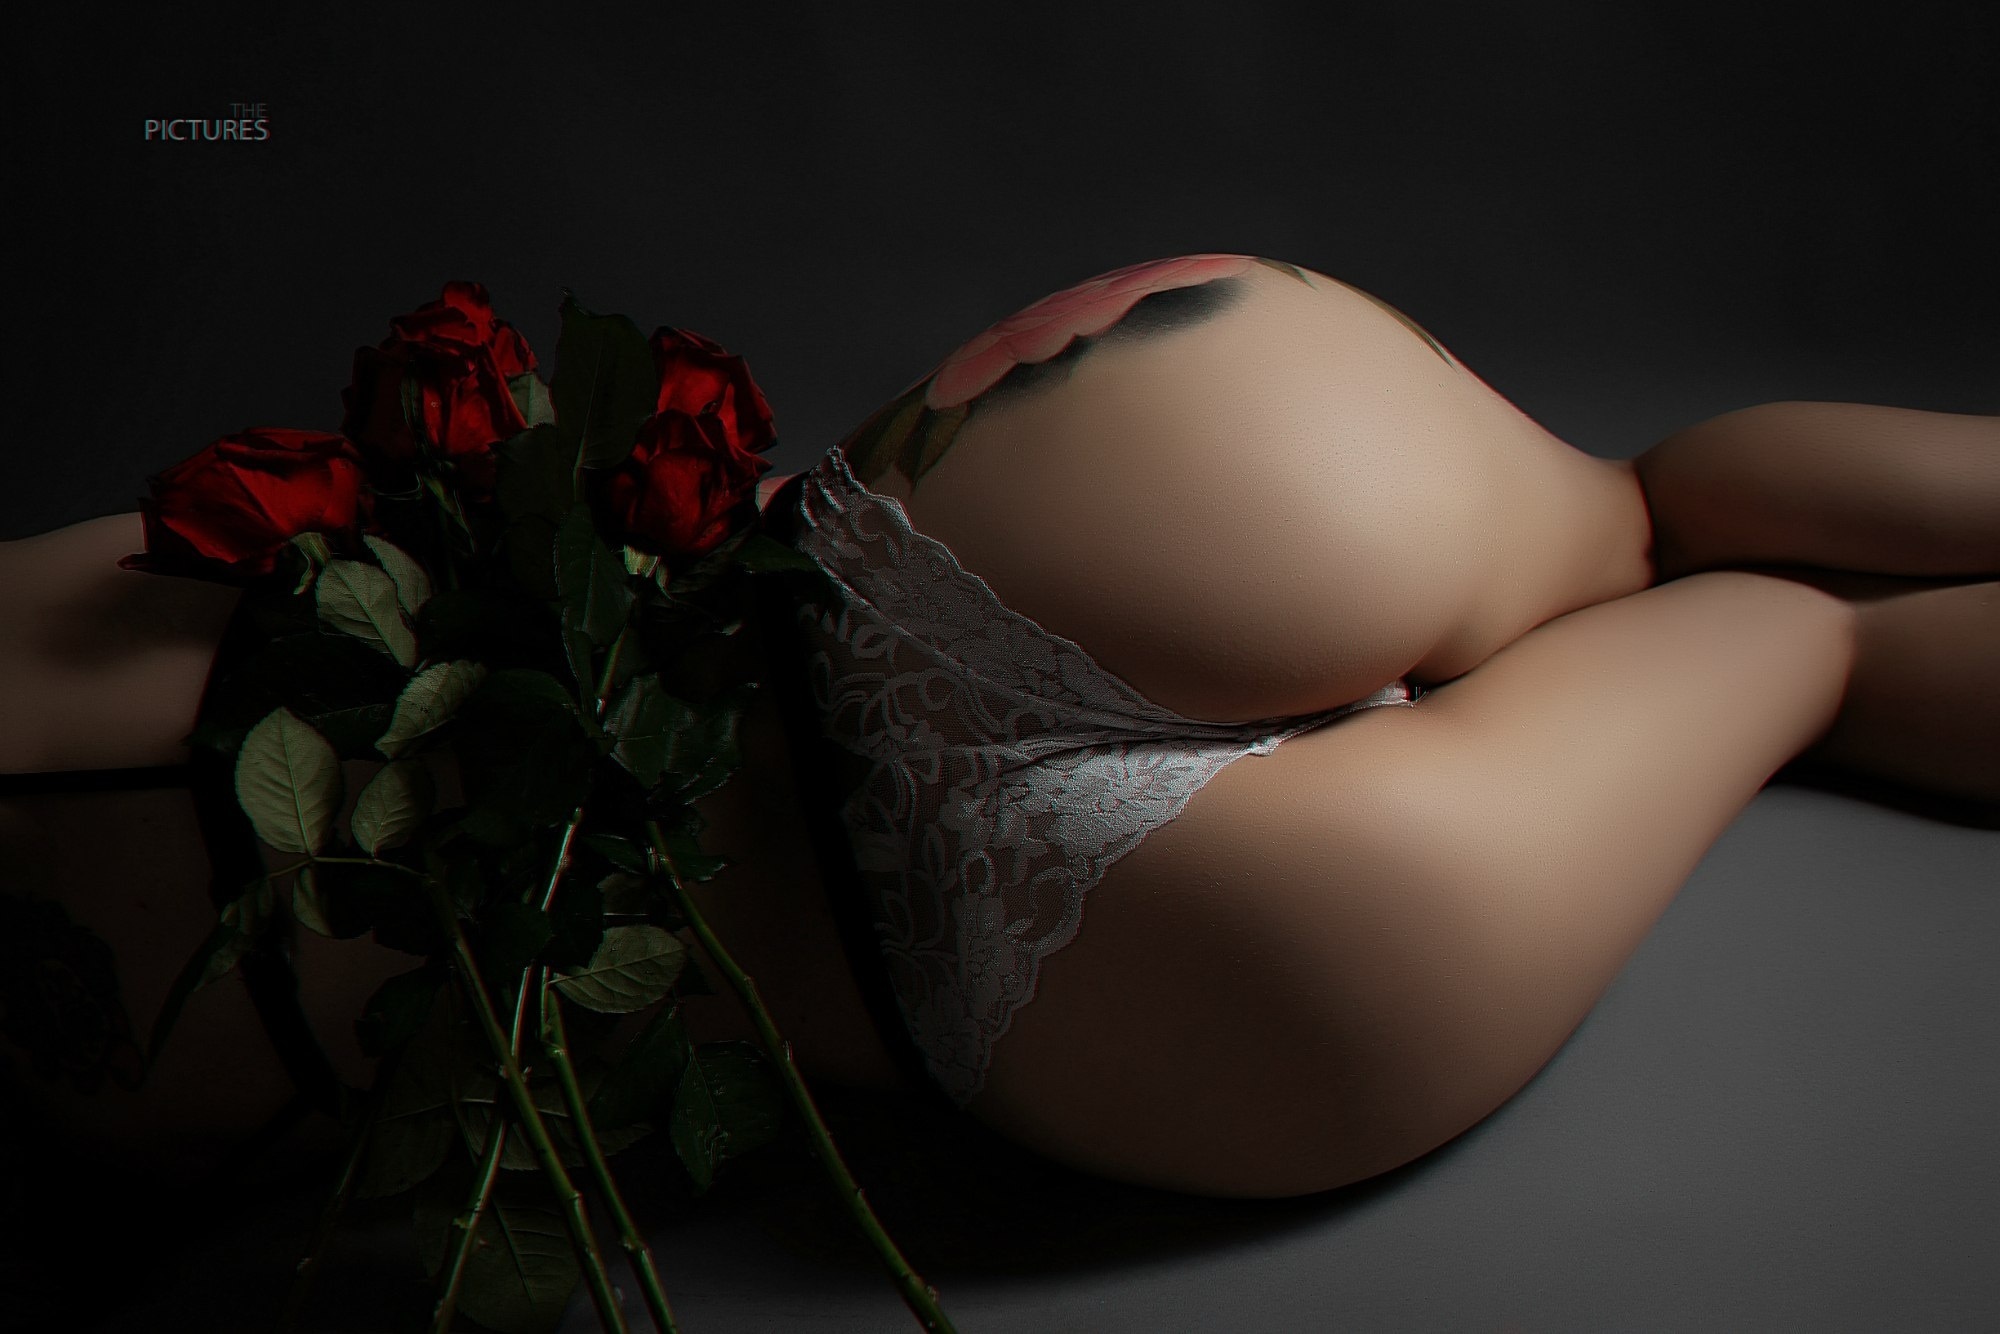 People 2000x1334 ass on the floor flowers rose women panties Nikolay Khvatov rear view plants red flowers lingerie white lingerie legs together women indoors indoors model lying down lying on side